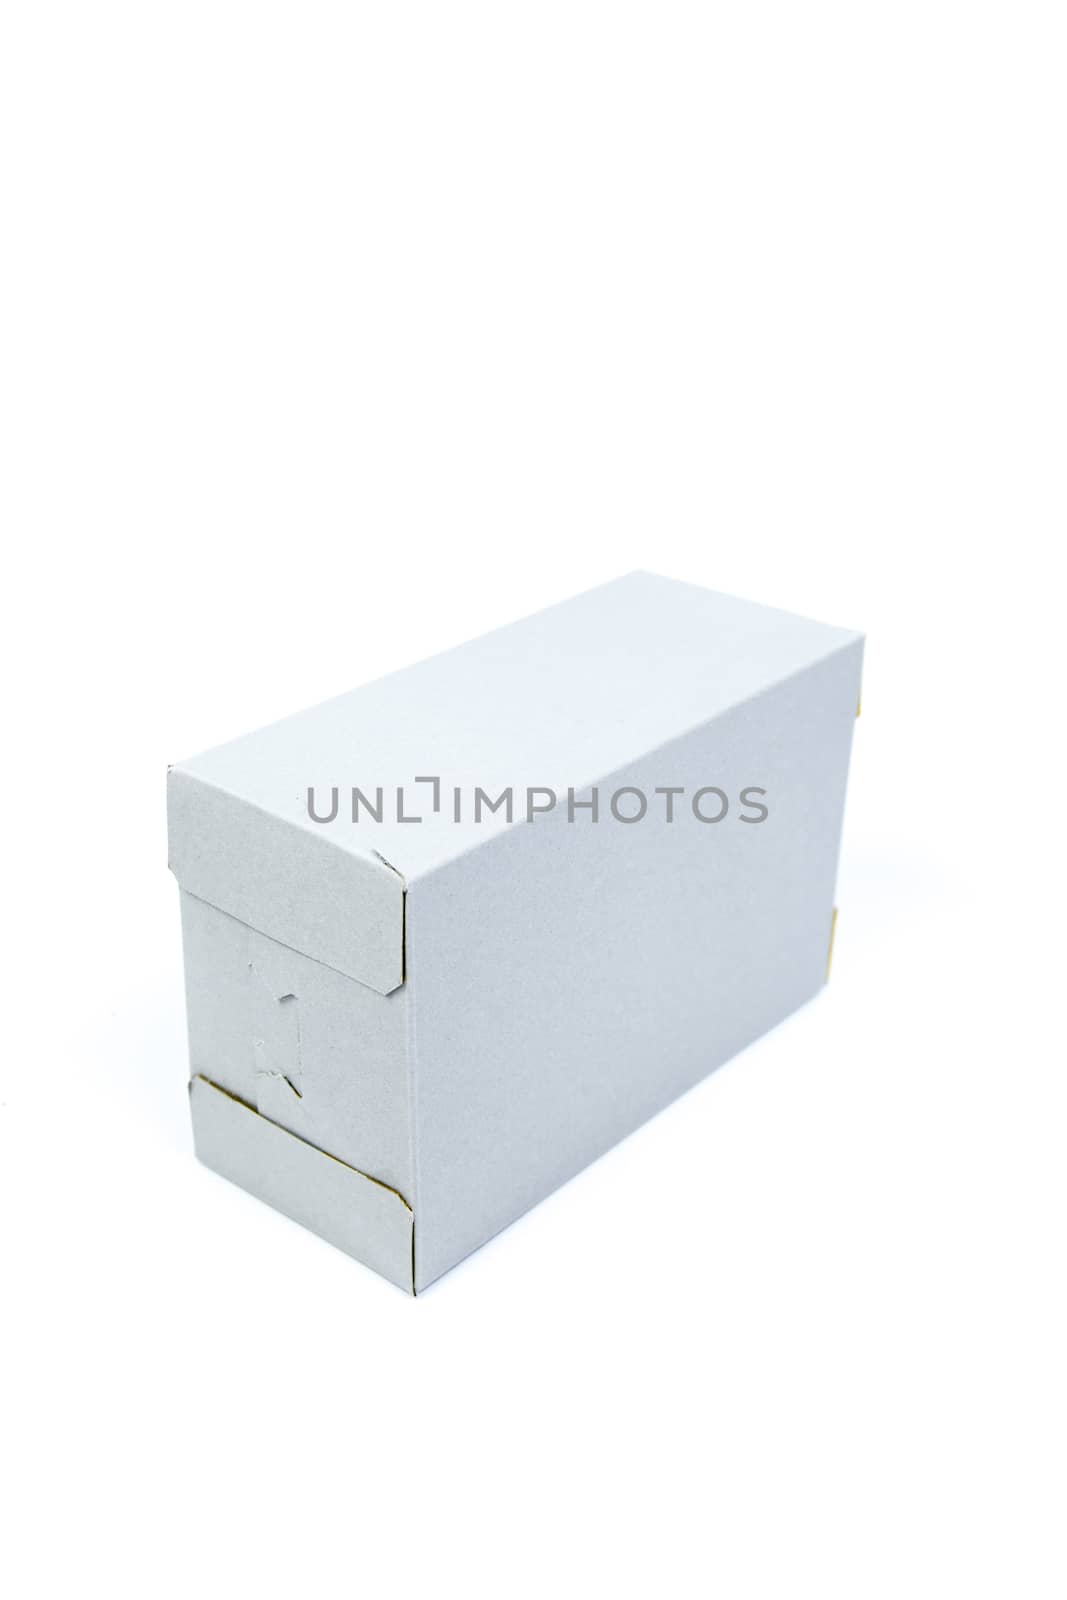 paper box on white isolated background.packshot in studio.